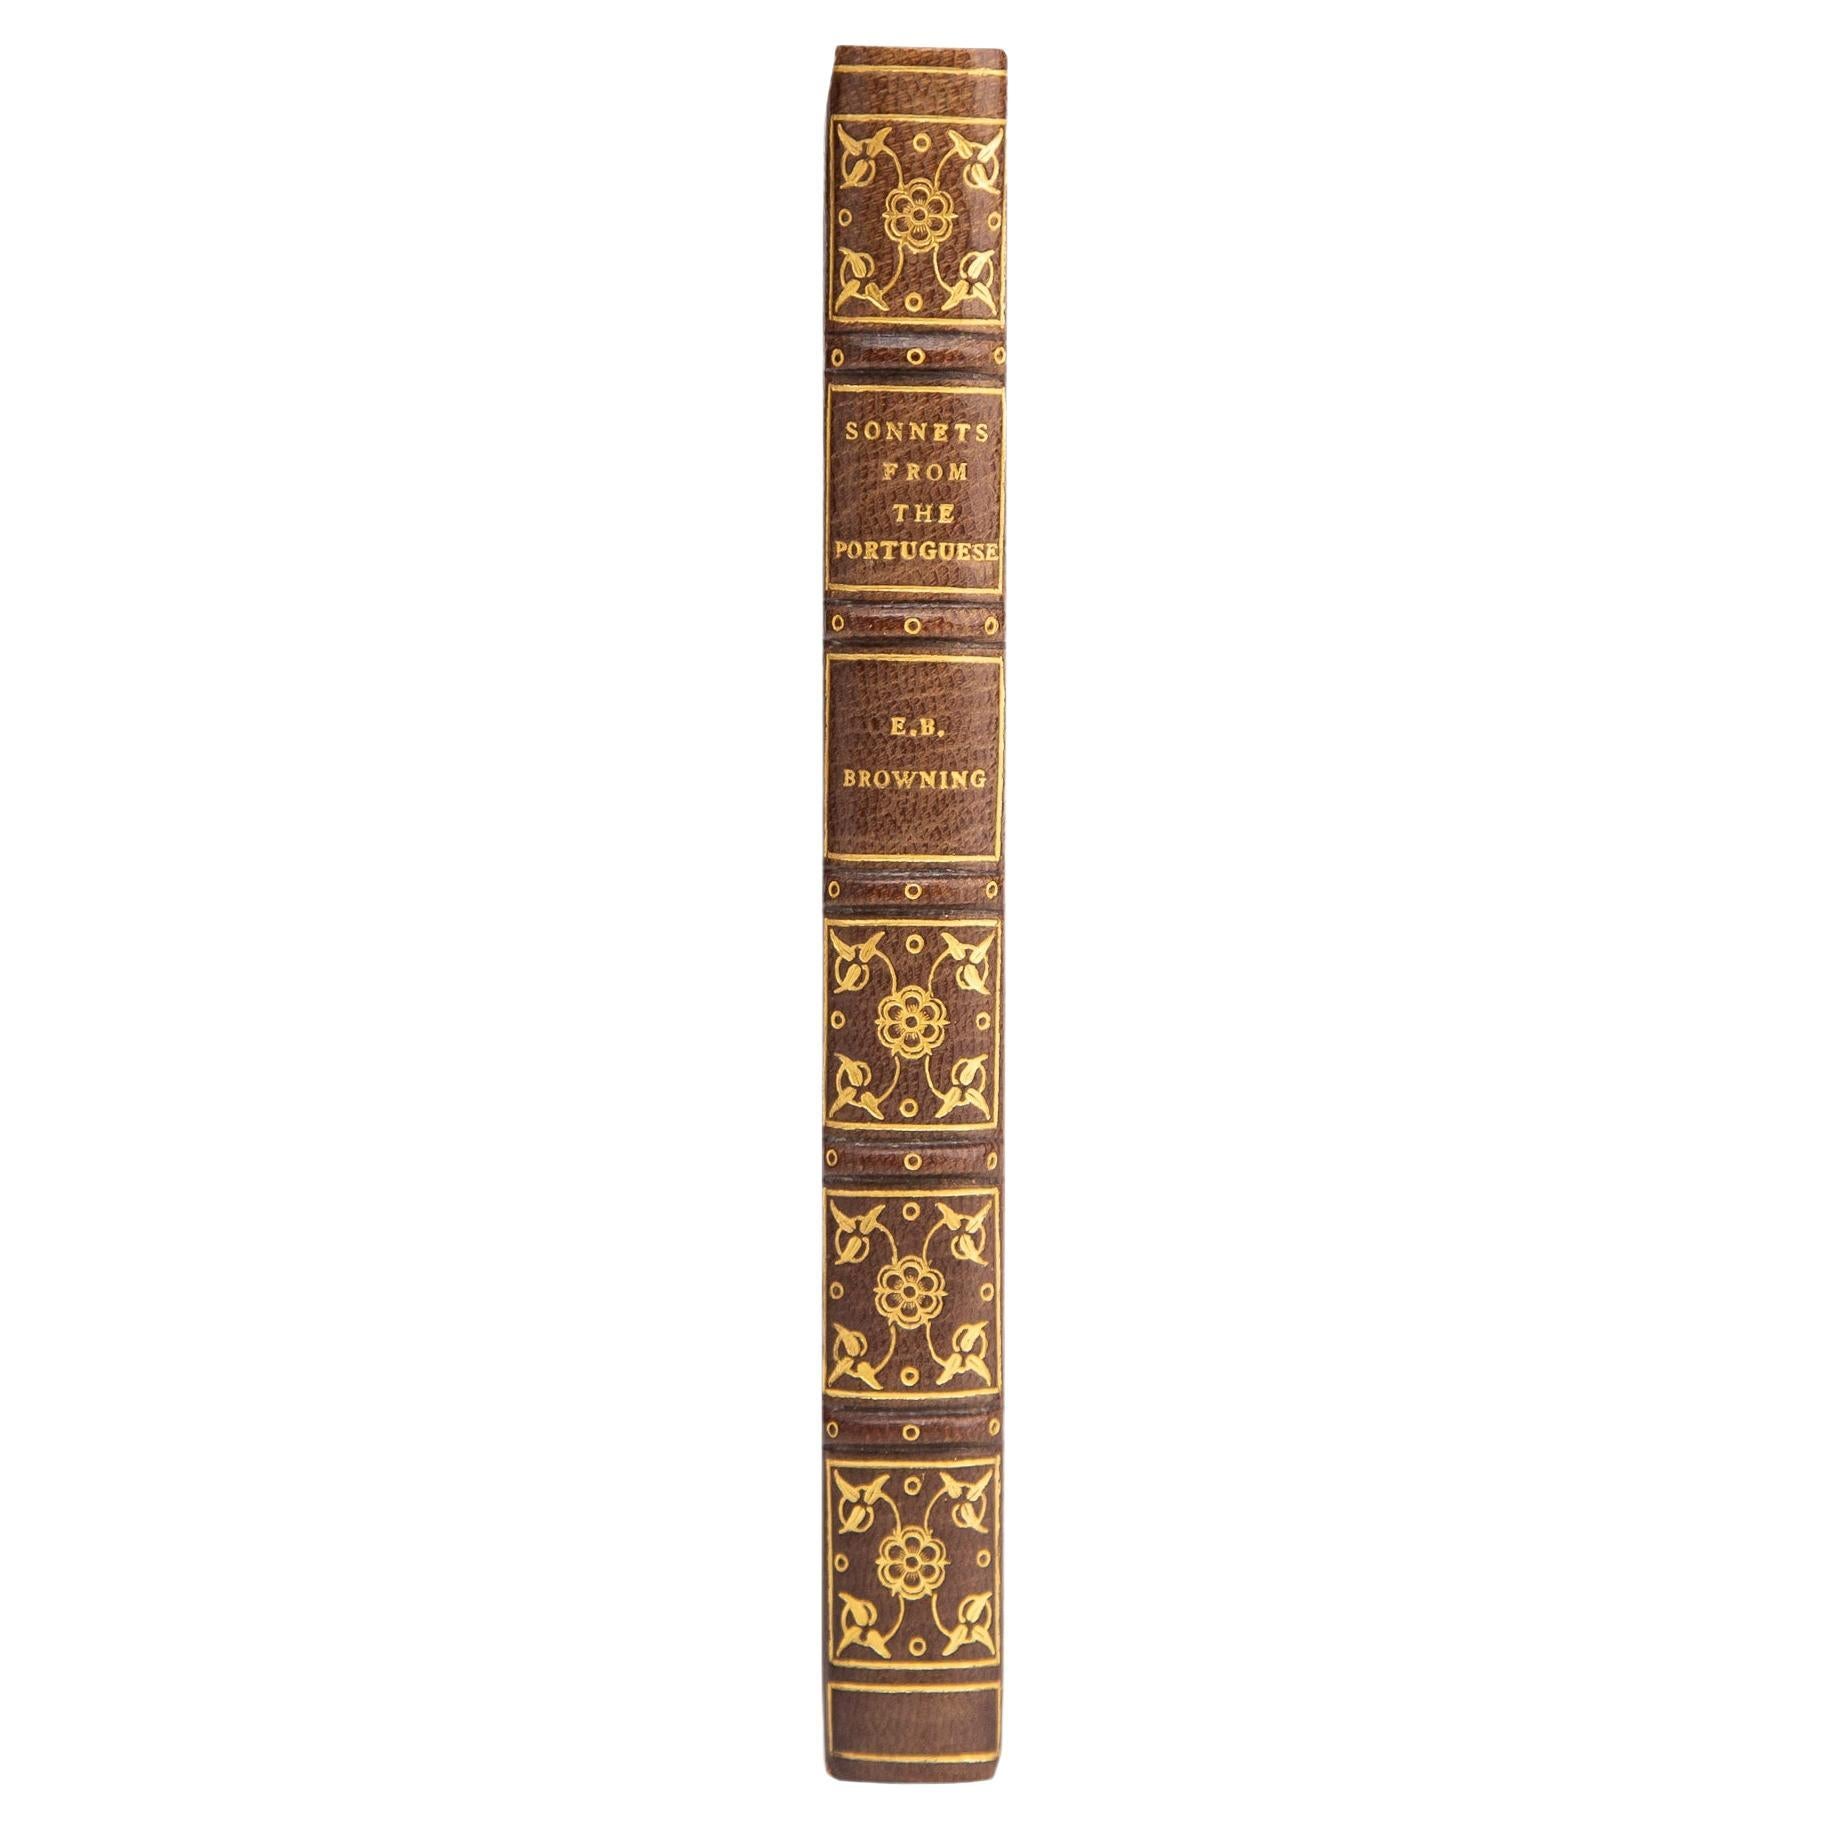 1 Volume, Elizabeth Barrett Browning, Sonnets from the Portuguese